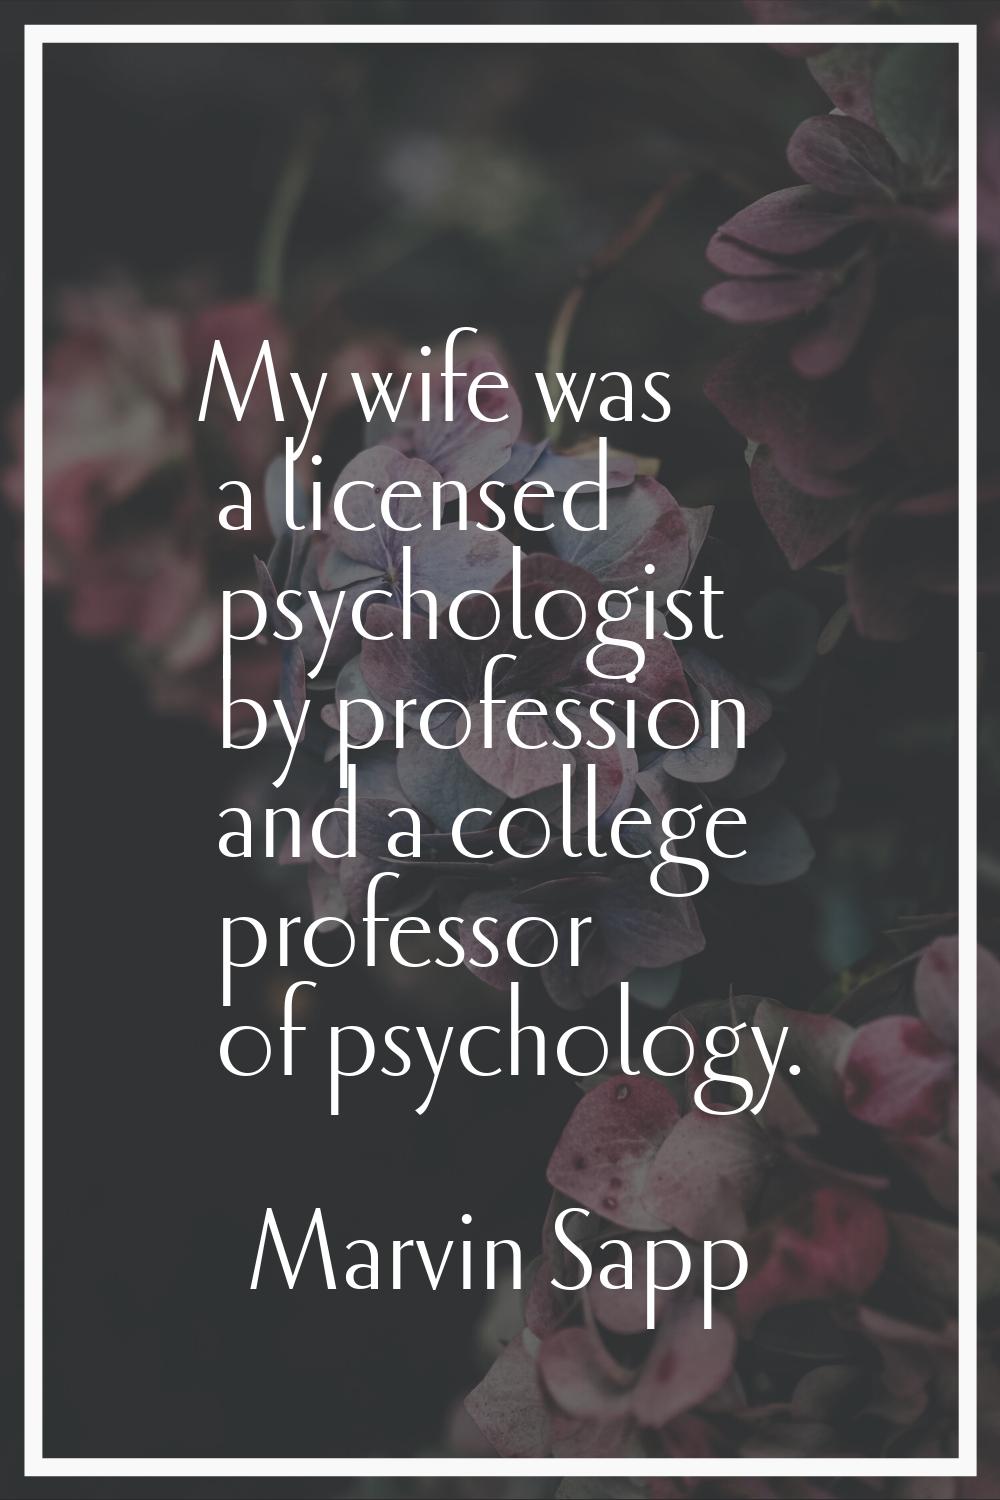 My wife was a licensed psychologist by profession and a college professor of psychology.